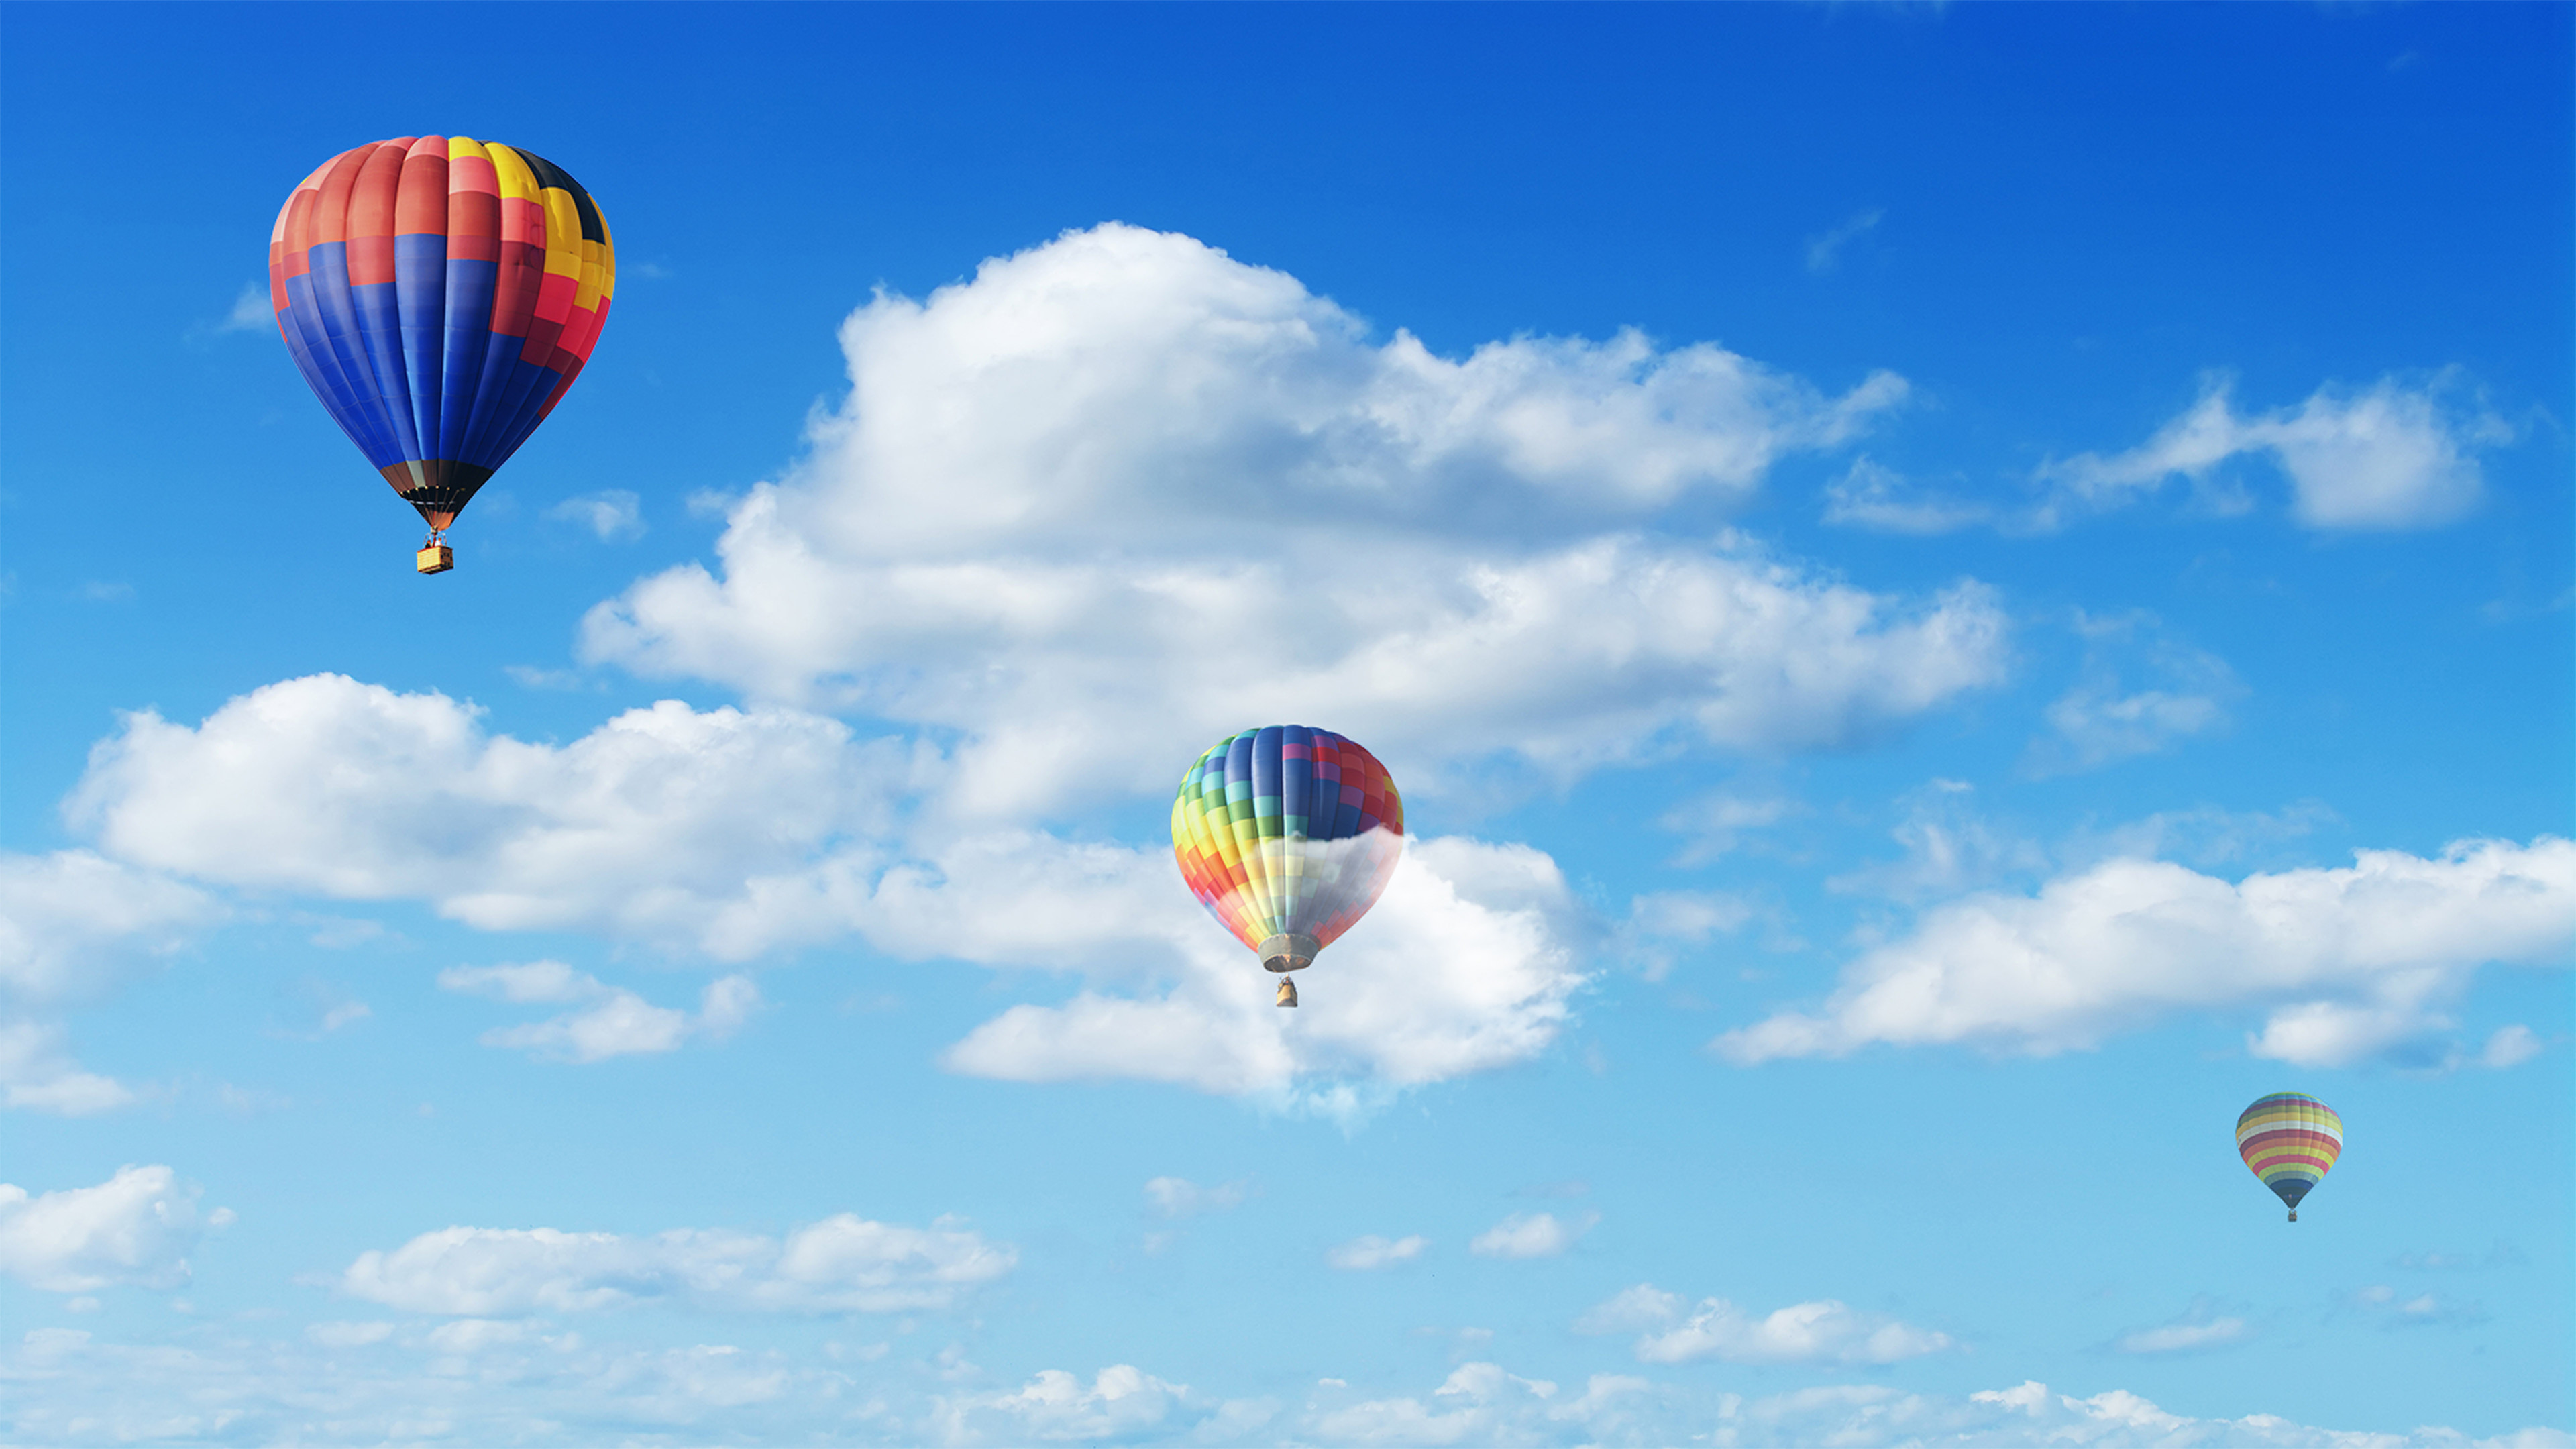 Colorful Hot Air Balloons Wallpaper (69+ images)